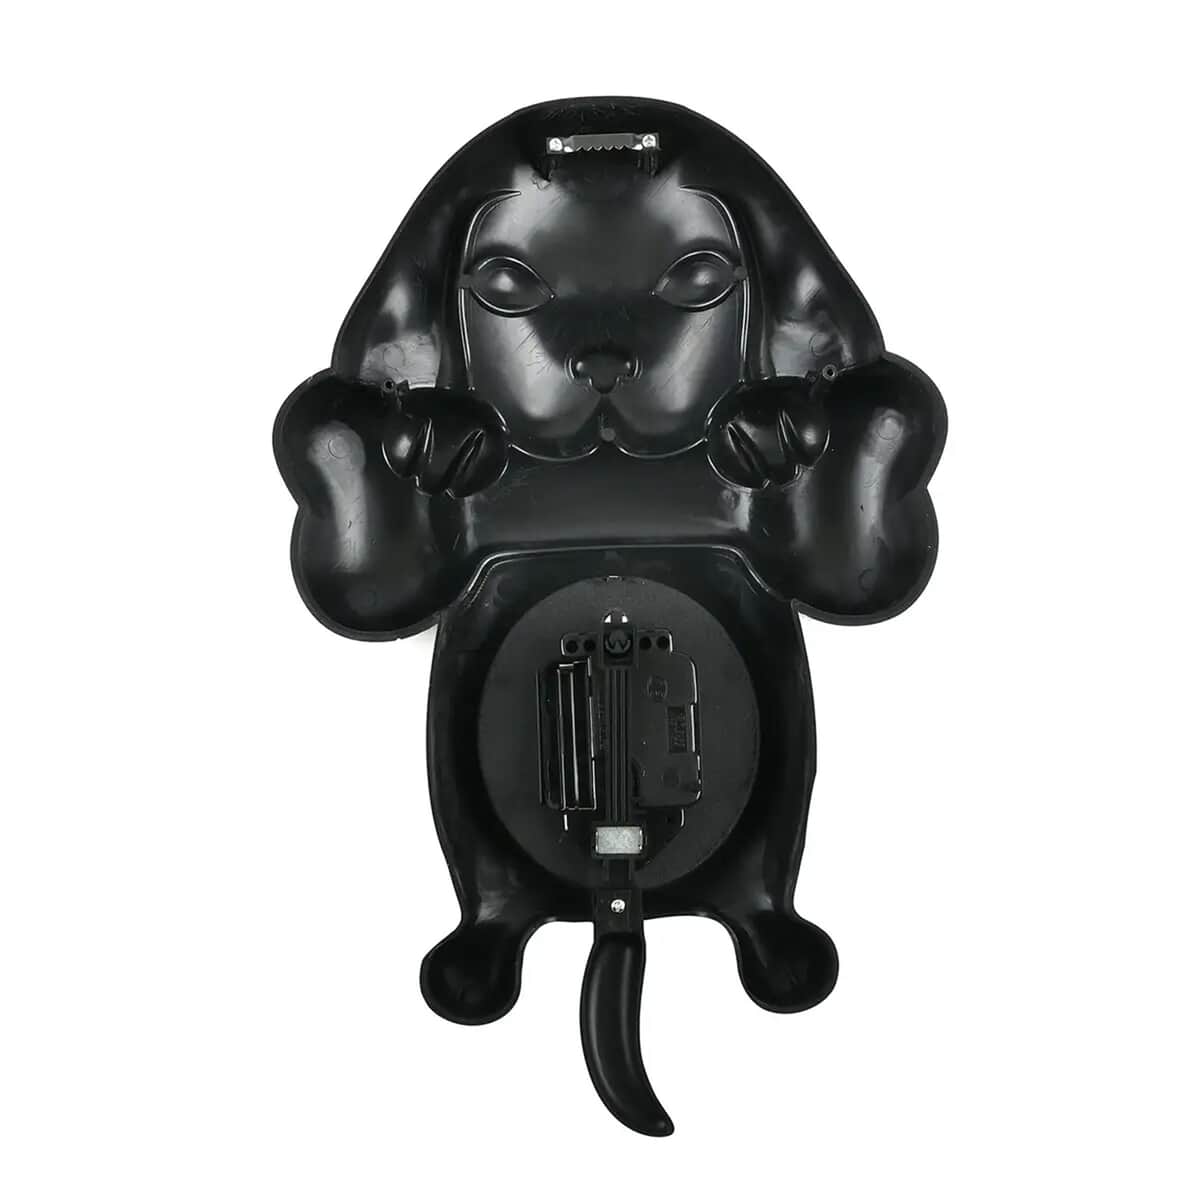 Black Dog Shaped Wall Clock with Moving Tail (14.17"x9.37"x2.51") (1xAA Battery Not Included) image number 5